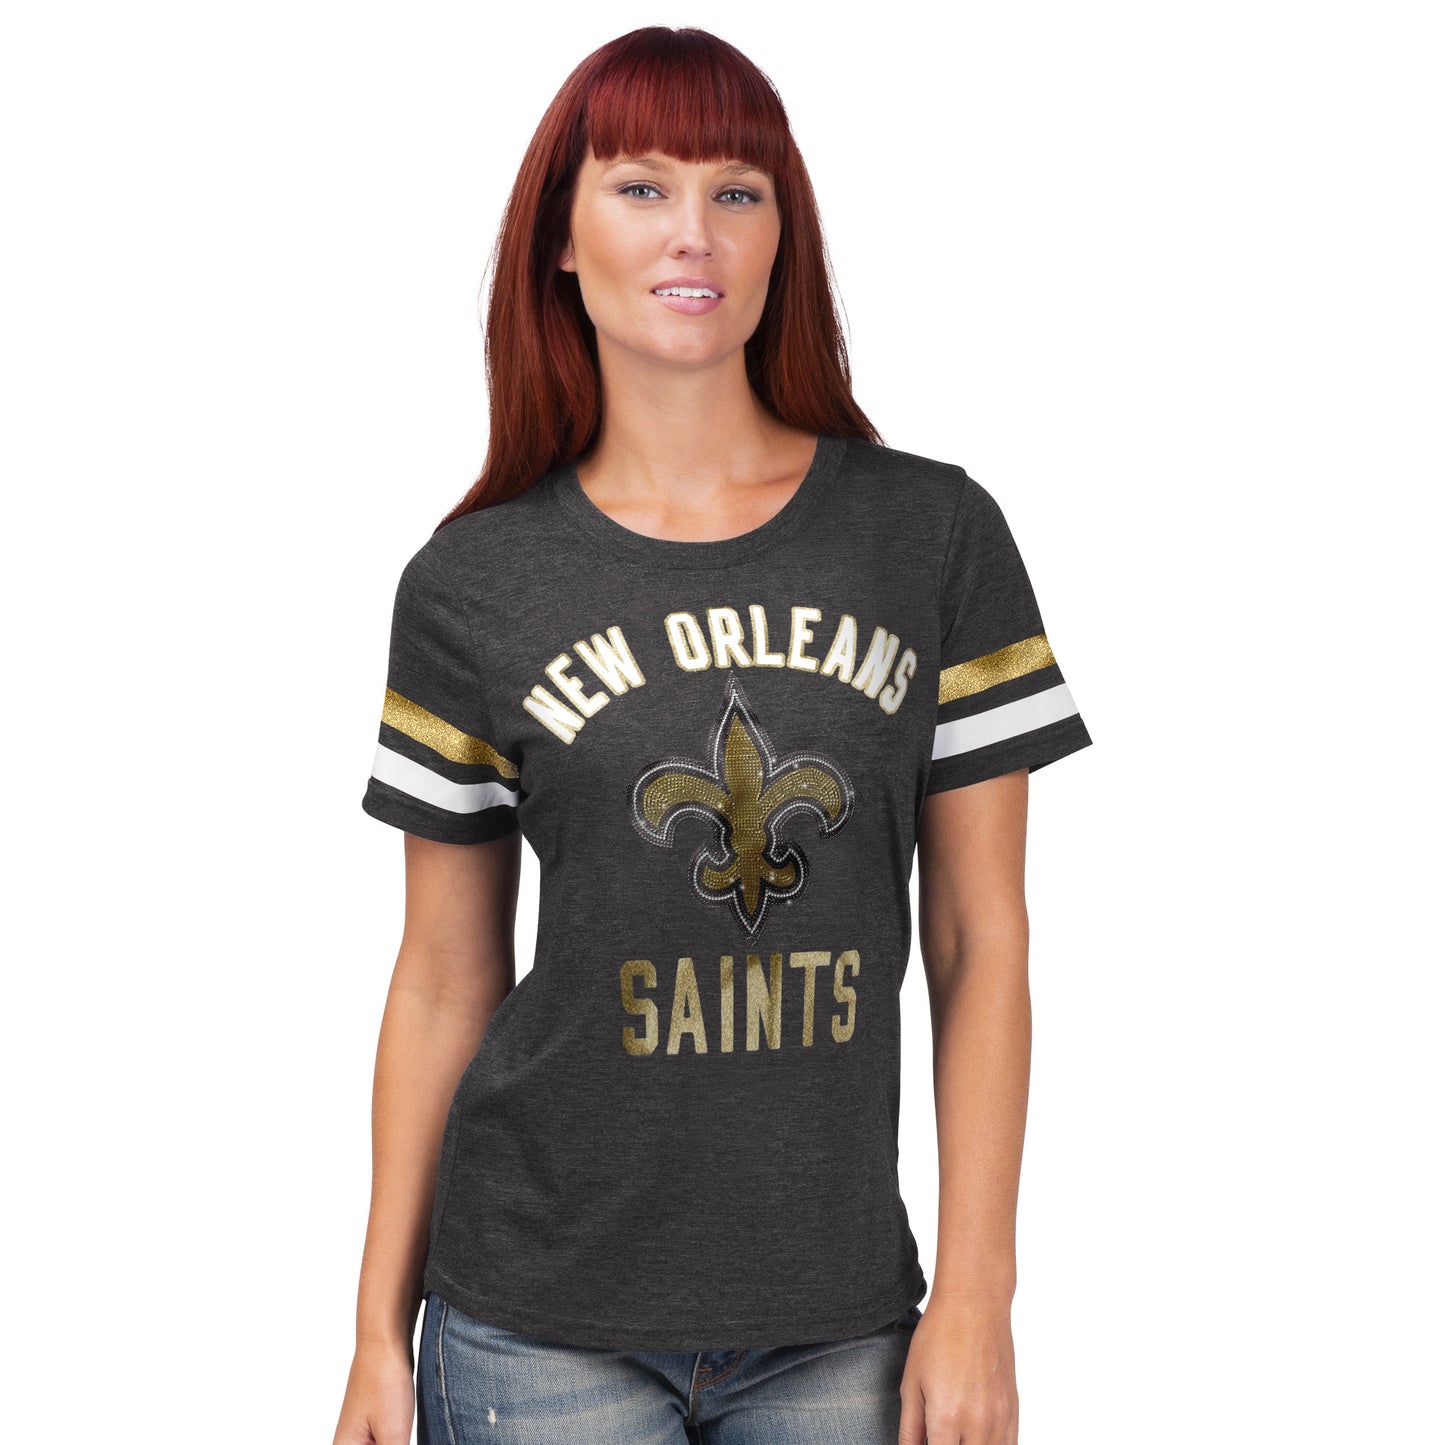 New Orleans Saints Women's G-III 4Her Extra Point Bling Tee Shirt - Black